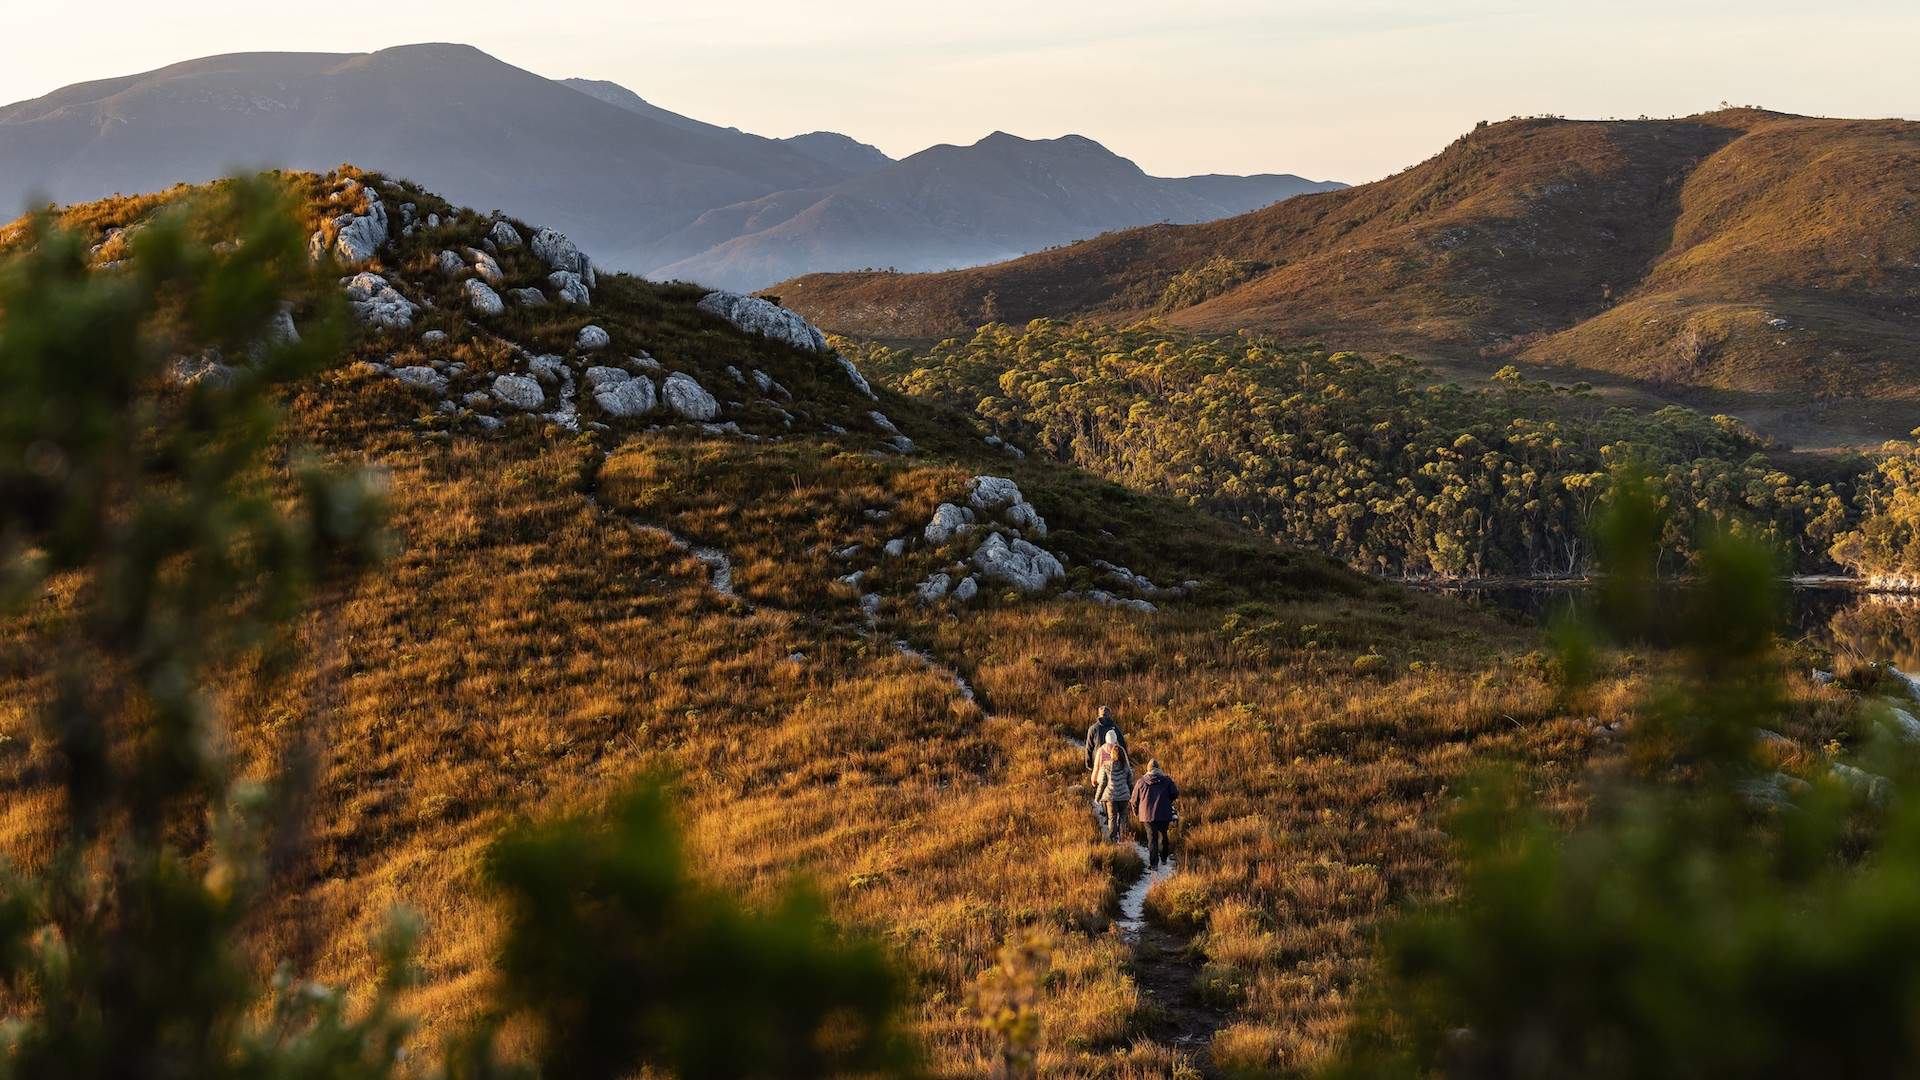 Discover and explore the grandeur and spirit of the Tasmanian wilderness on our Southwest Wilderness day tour.